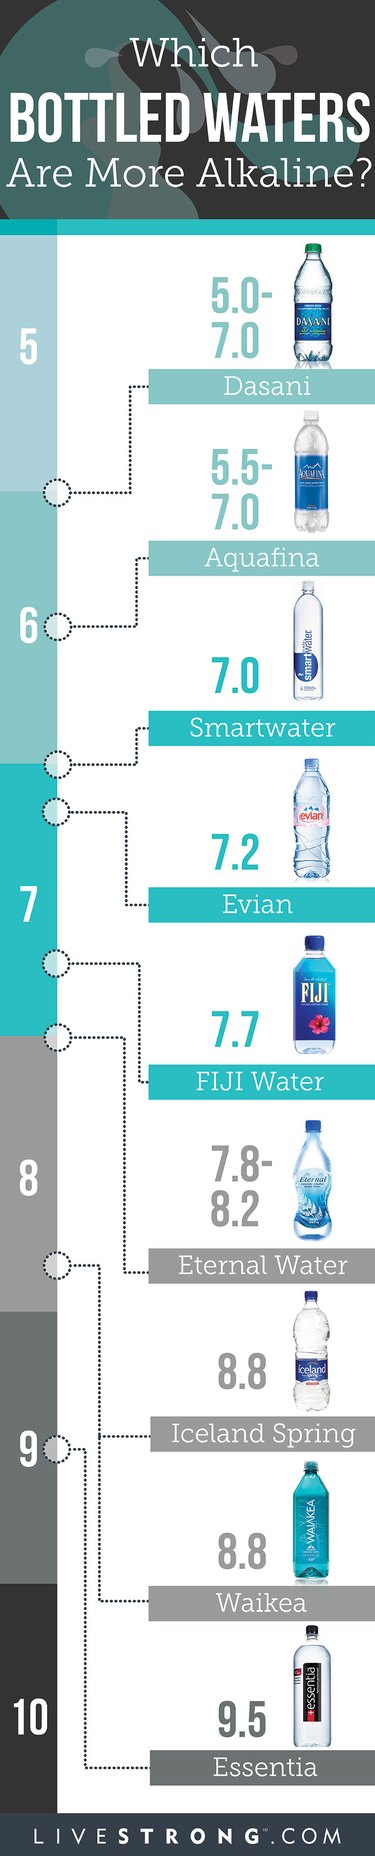 Infographic showing alkalinity of different types of bottled waters